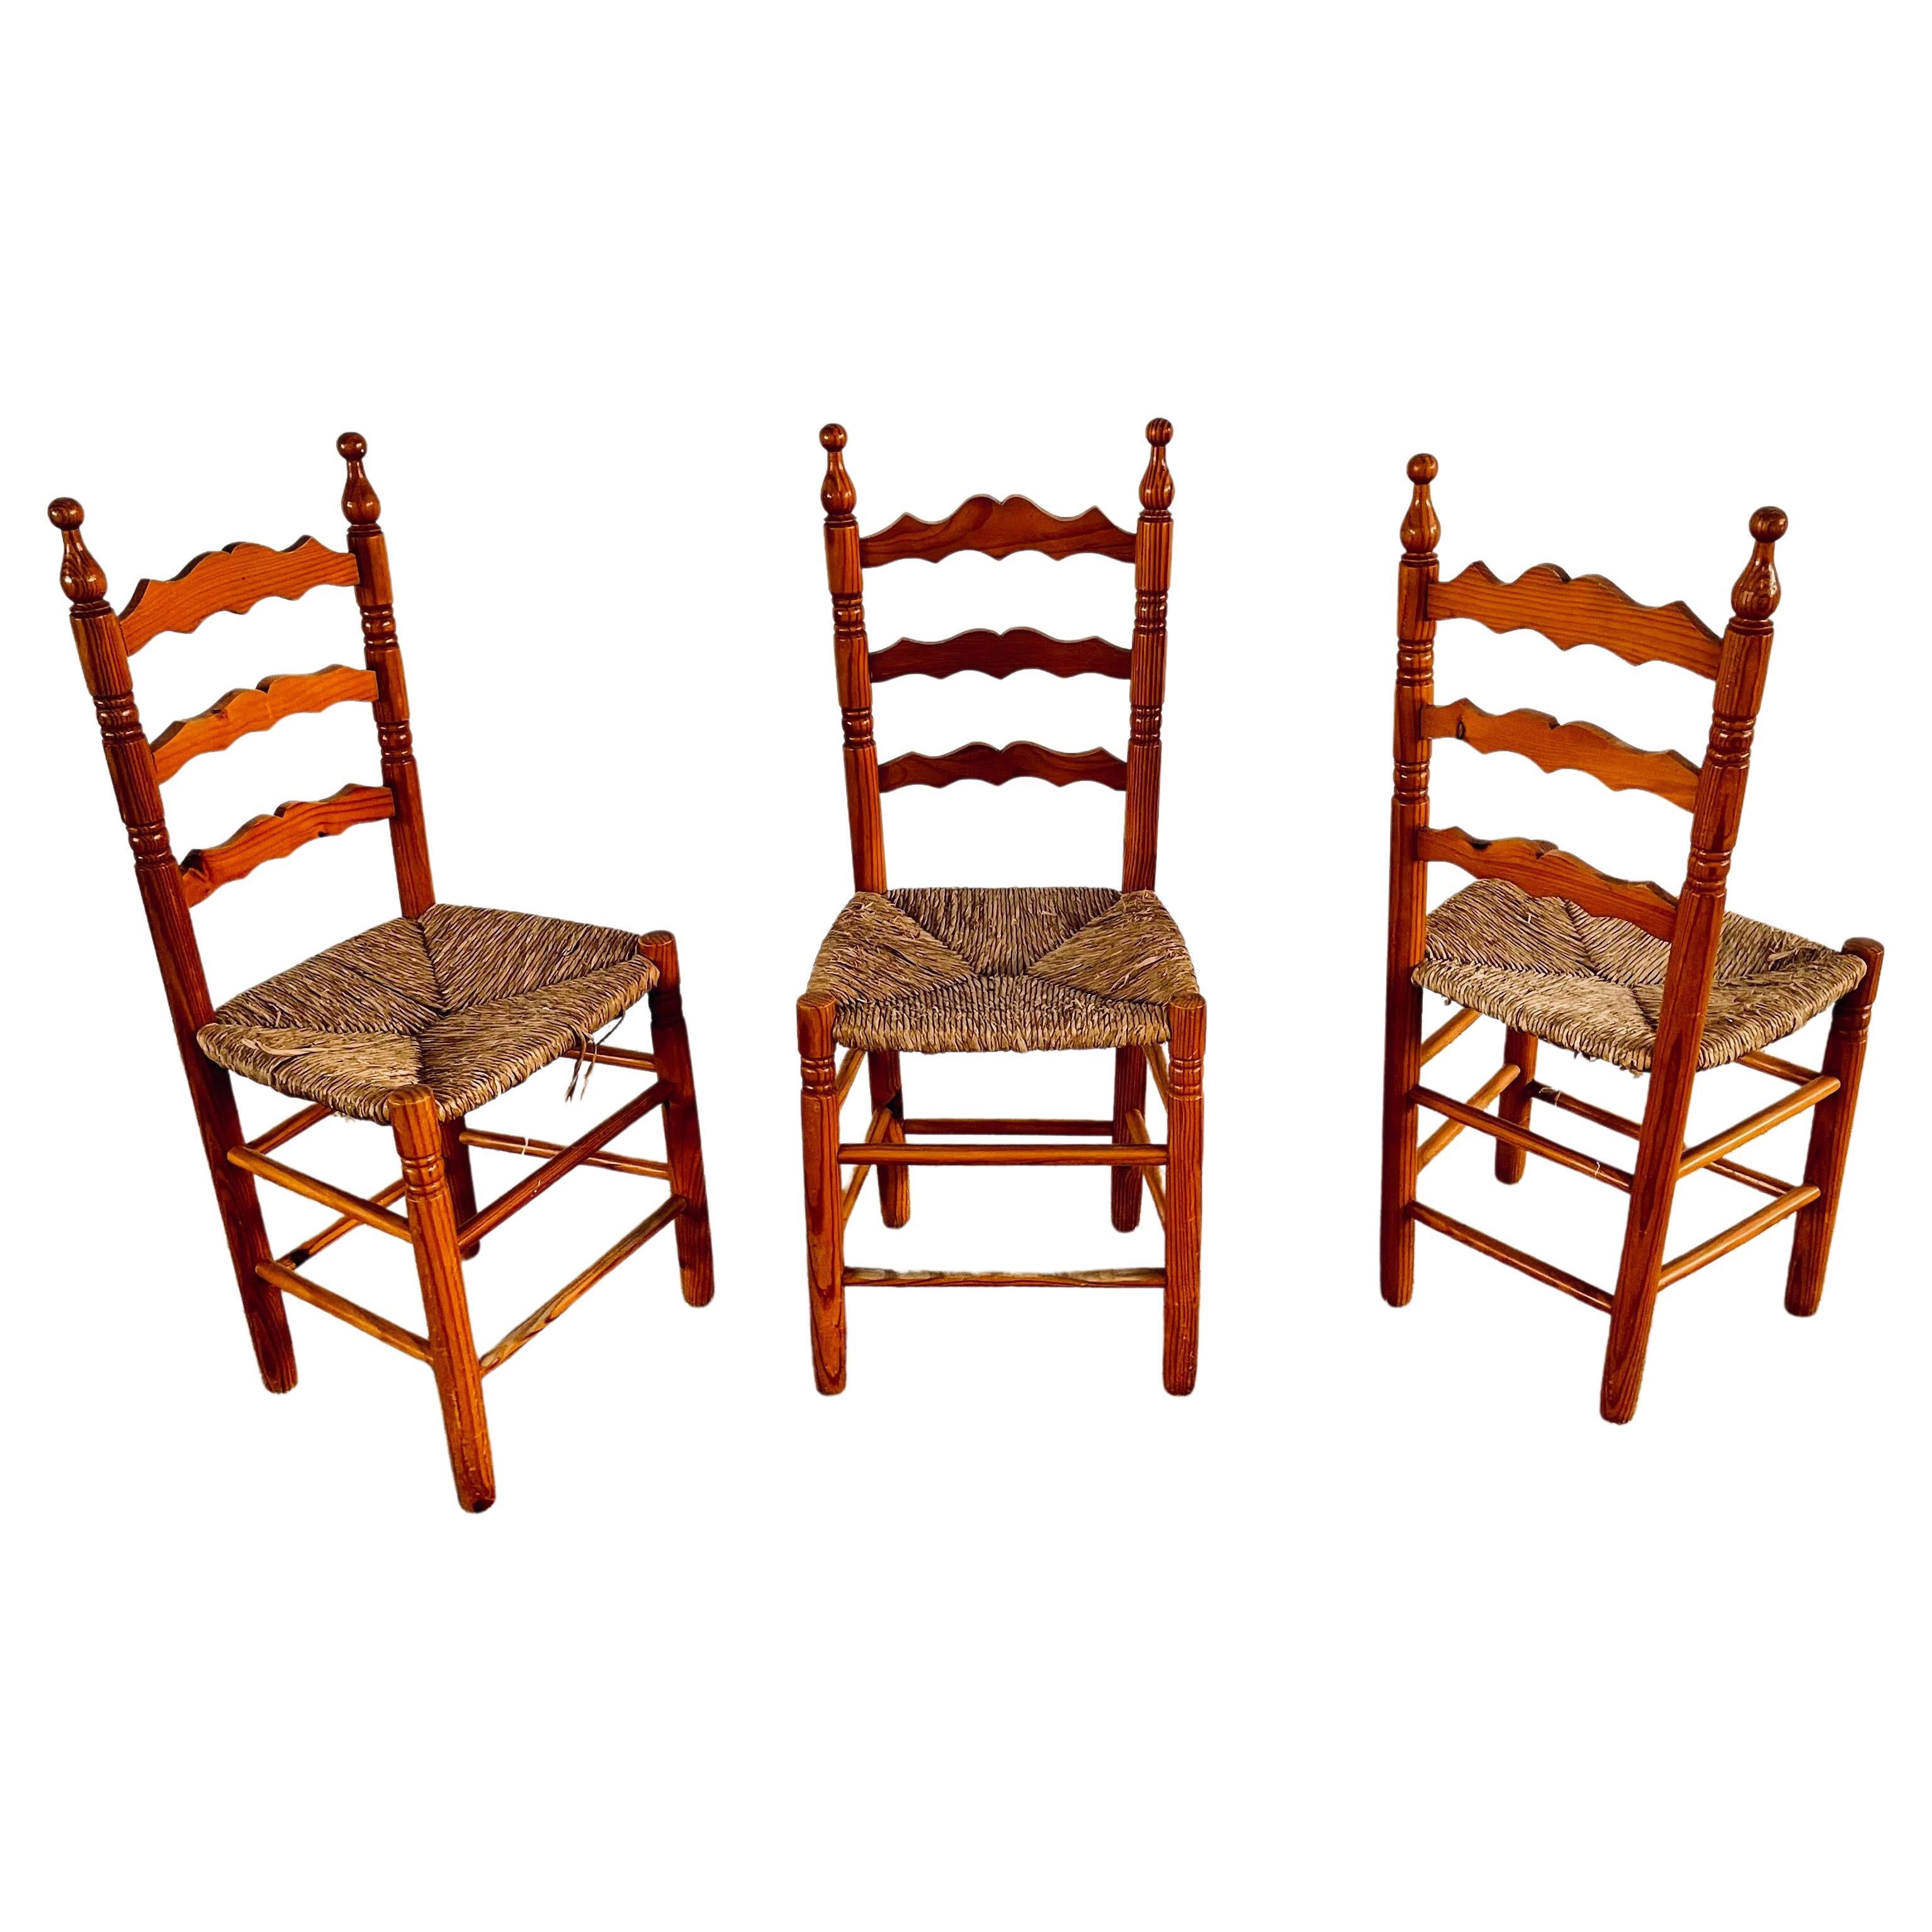 Vintage Spanish Rush Seat Chair, Wicker and turned wood Castillian Chair